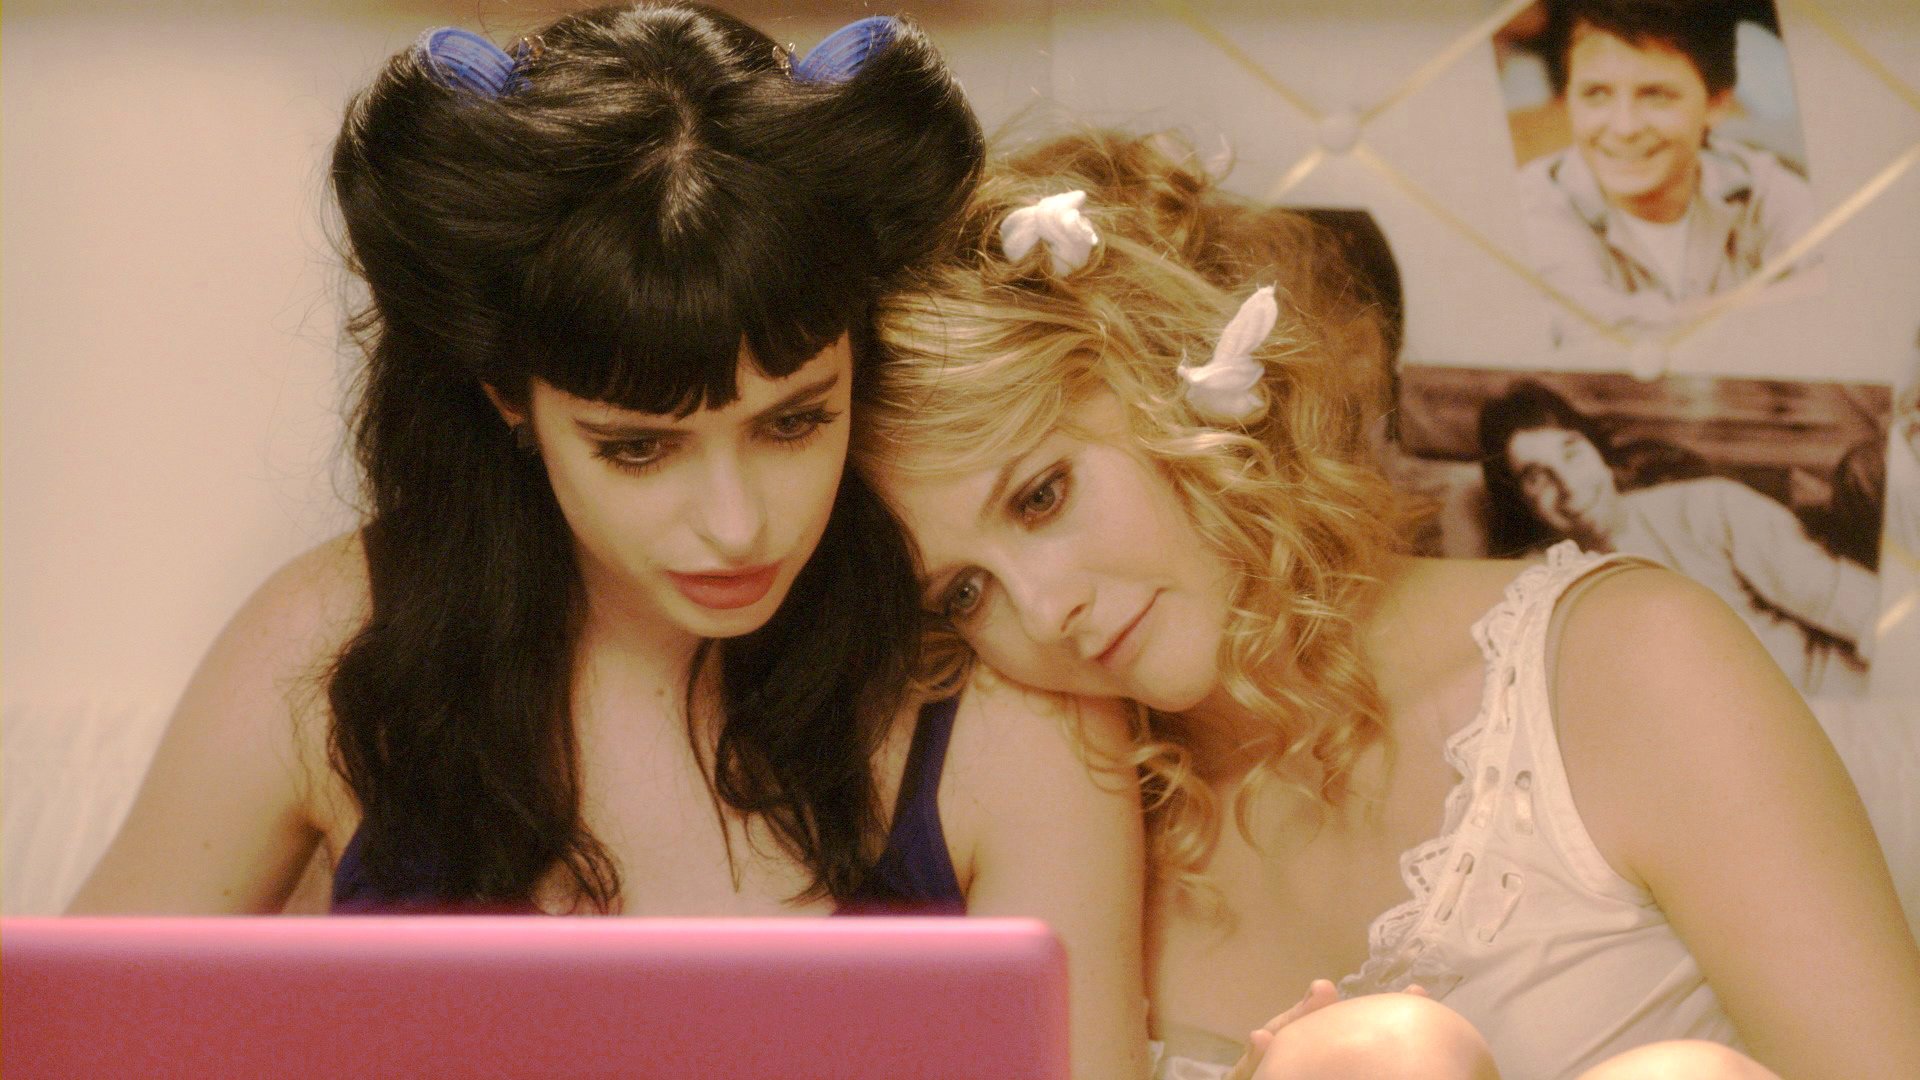 Krysten Ritter stars as Stacy and Alicia Silverstone stars as Goody in Anchor Bay Films' Vamps (2012)